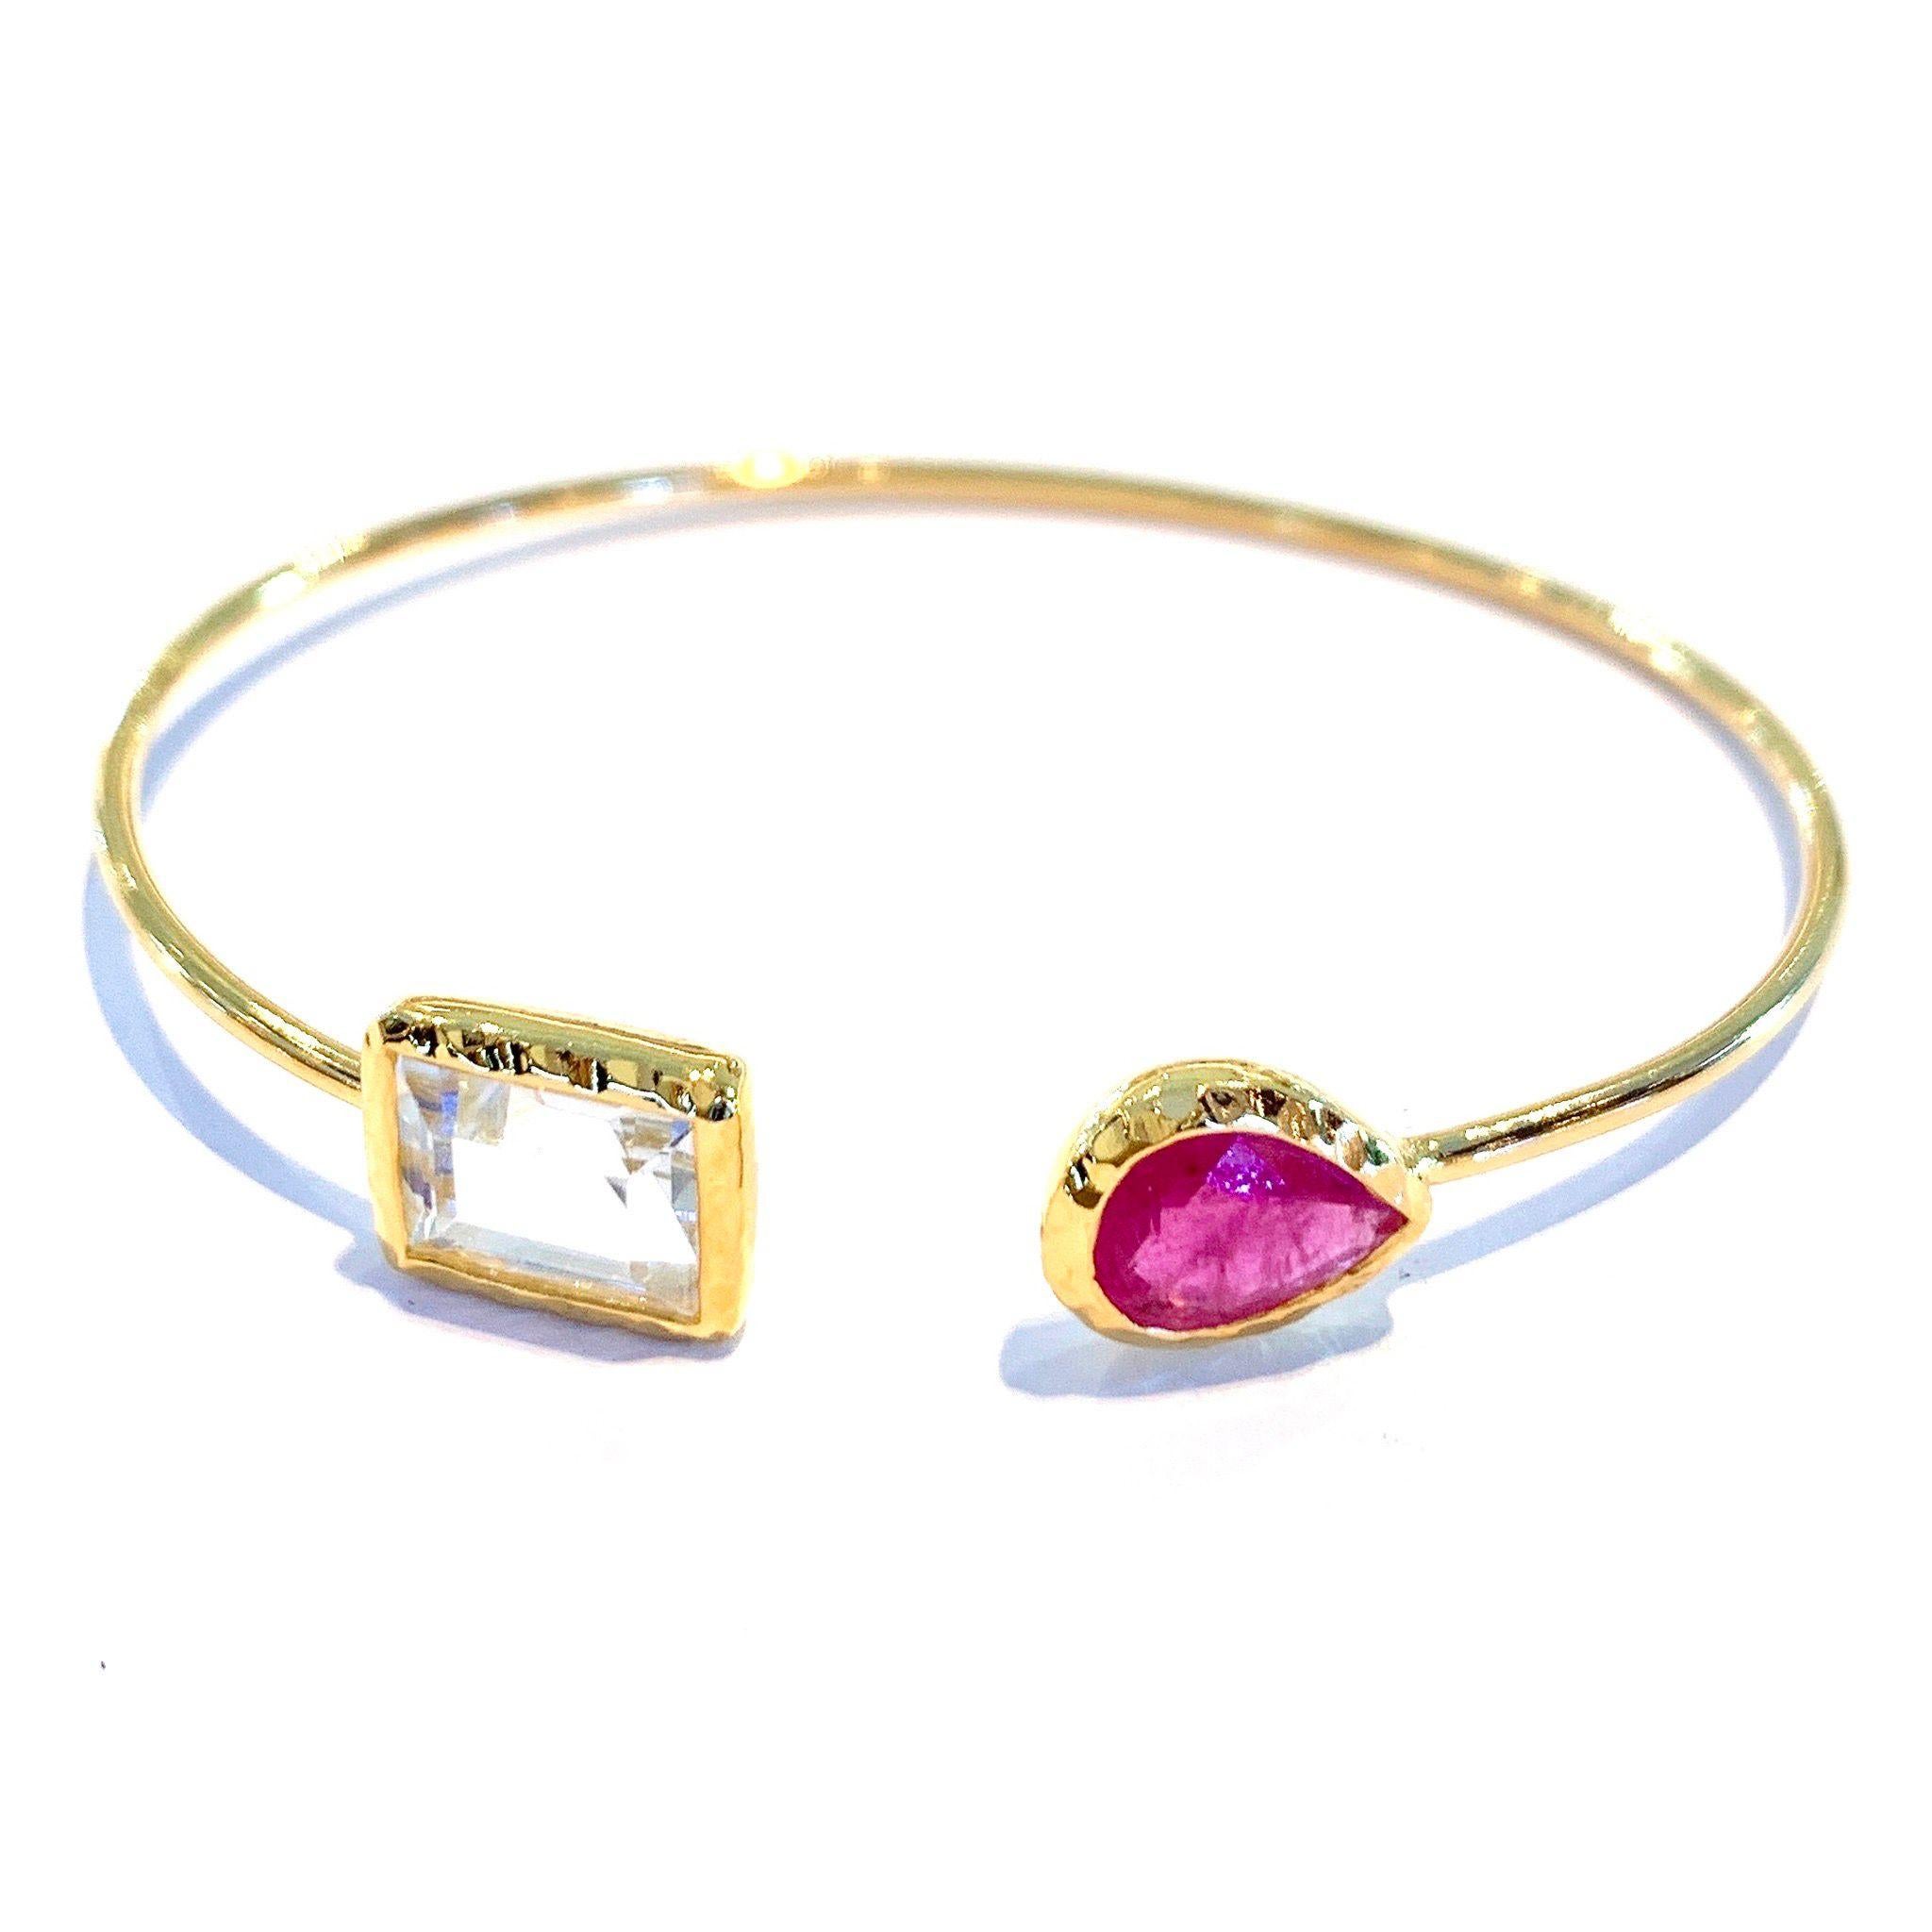 Bochic “Jungle” Bangle White step cut Topaz and Red Ruby 
Natural pear shaped ruby 
Natural white topaz 
22K gold and silver 
3 microns of gold 
This bangle is perfect to wear day to night by Itself or as a stackable
A perfect cross between fashion